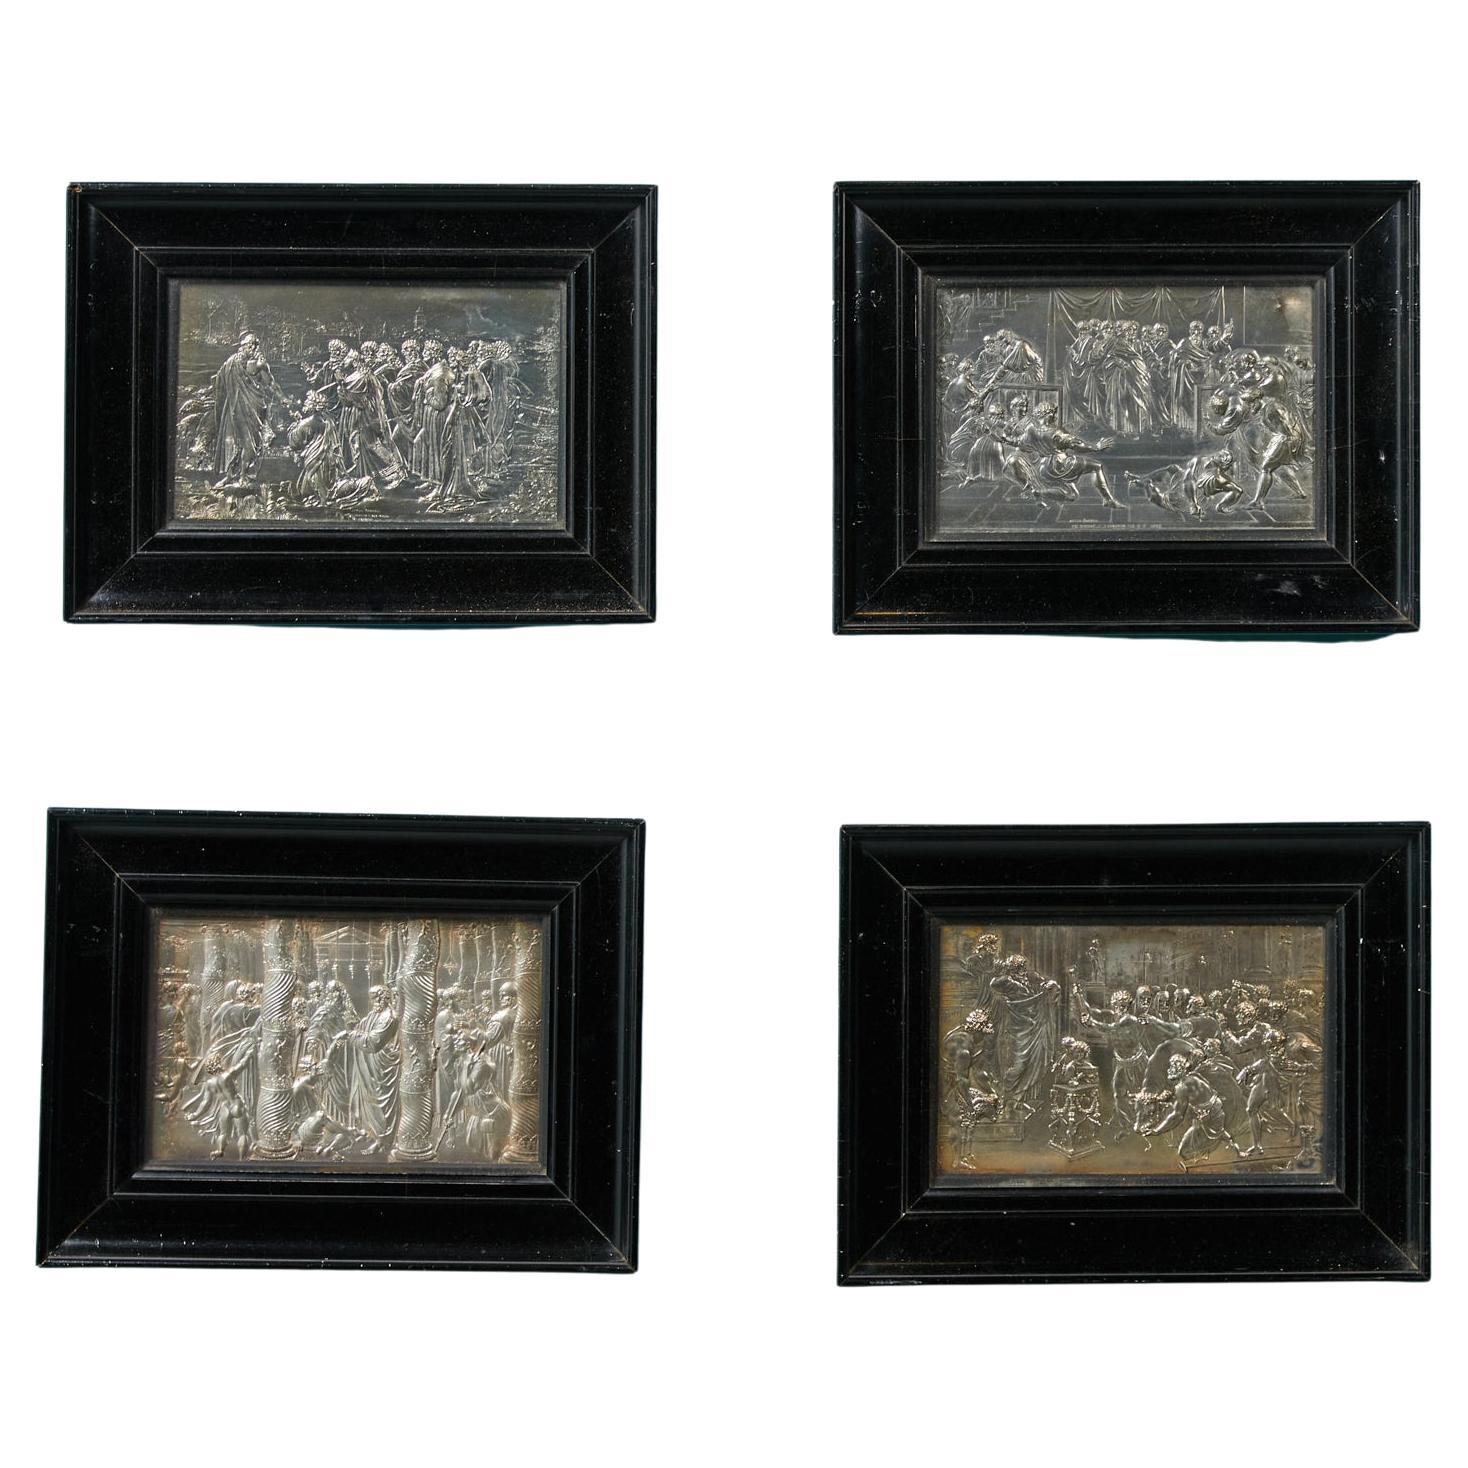 Set of 7 Framed Silver Plate Depictions of the Raphael Cartoons After Henning